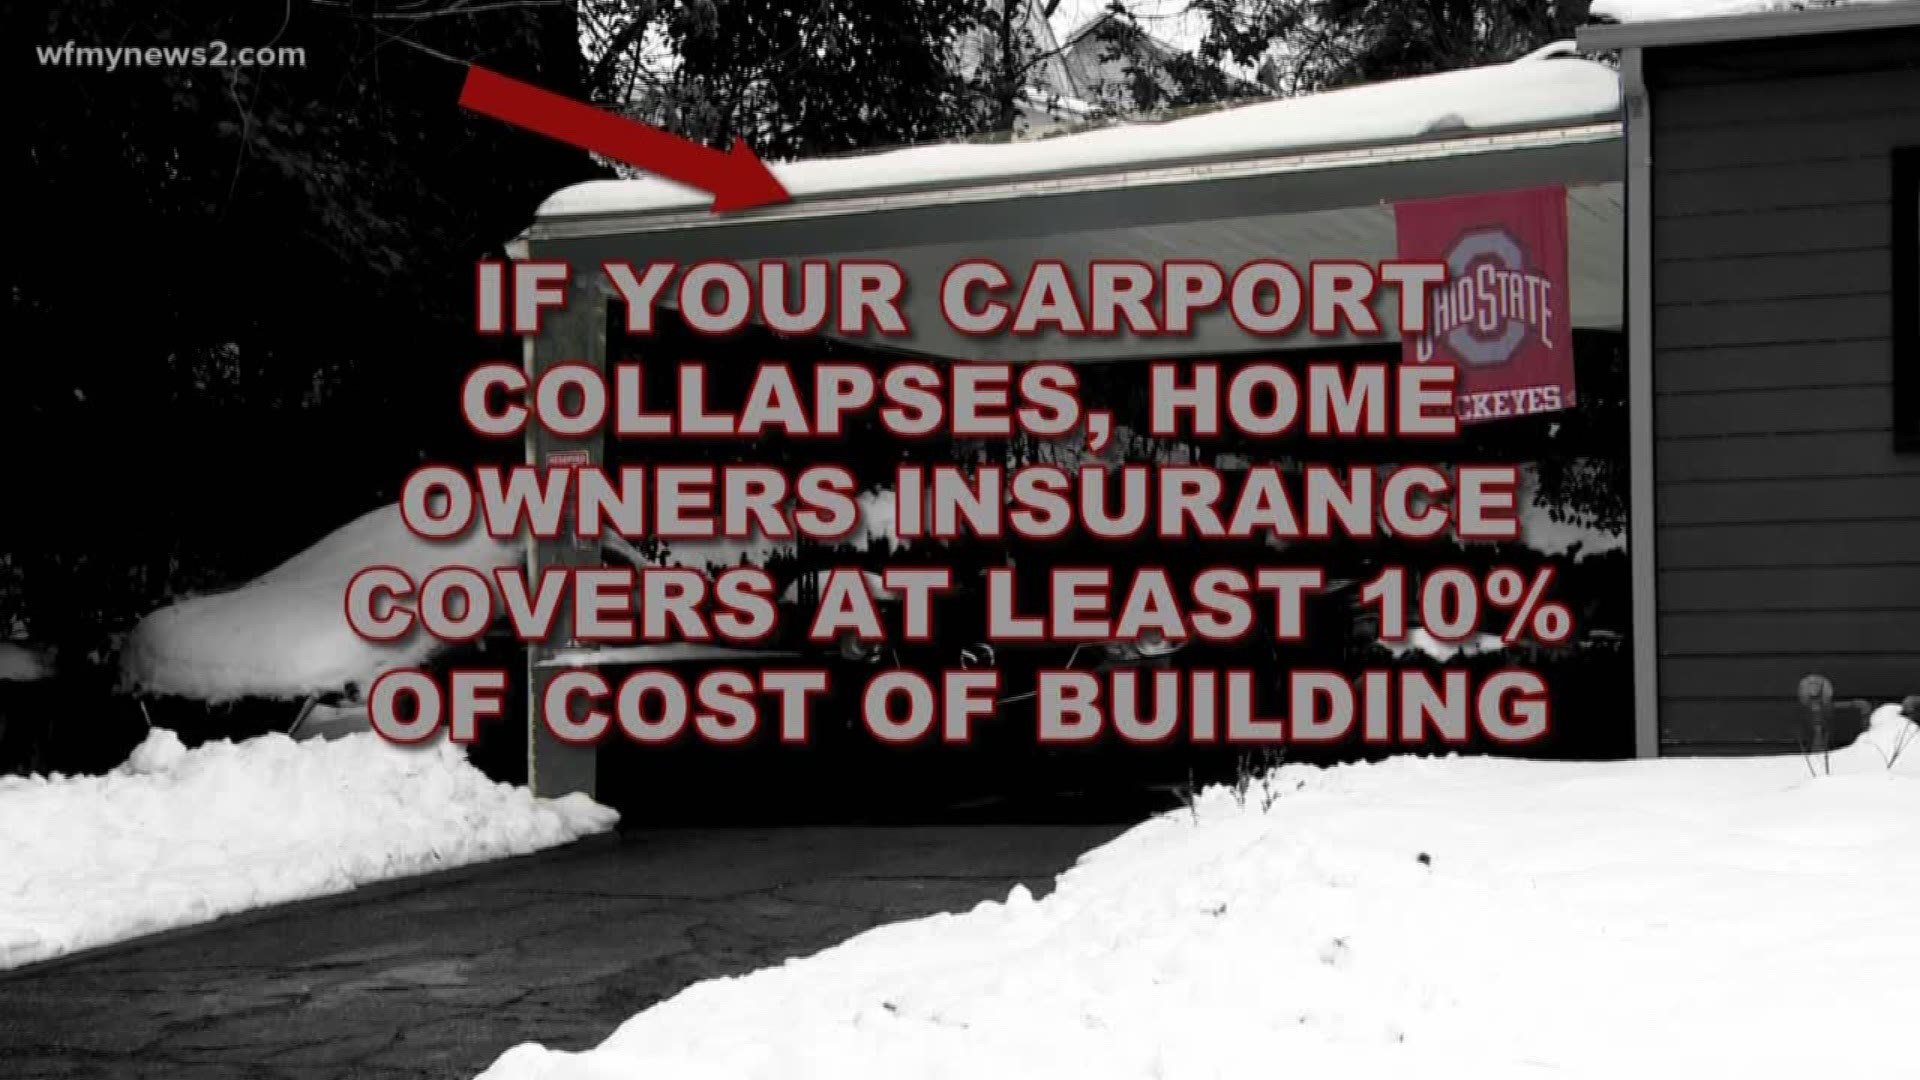 WFMY News 2's Tanya Rivera has what you need to know about insurance and heavy snow.